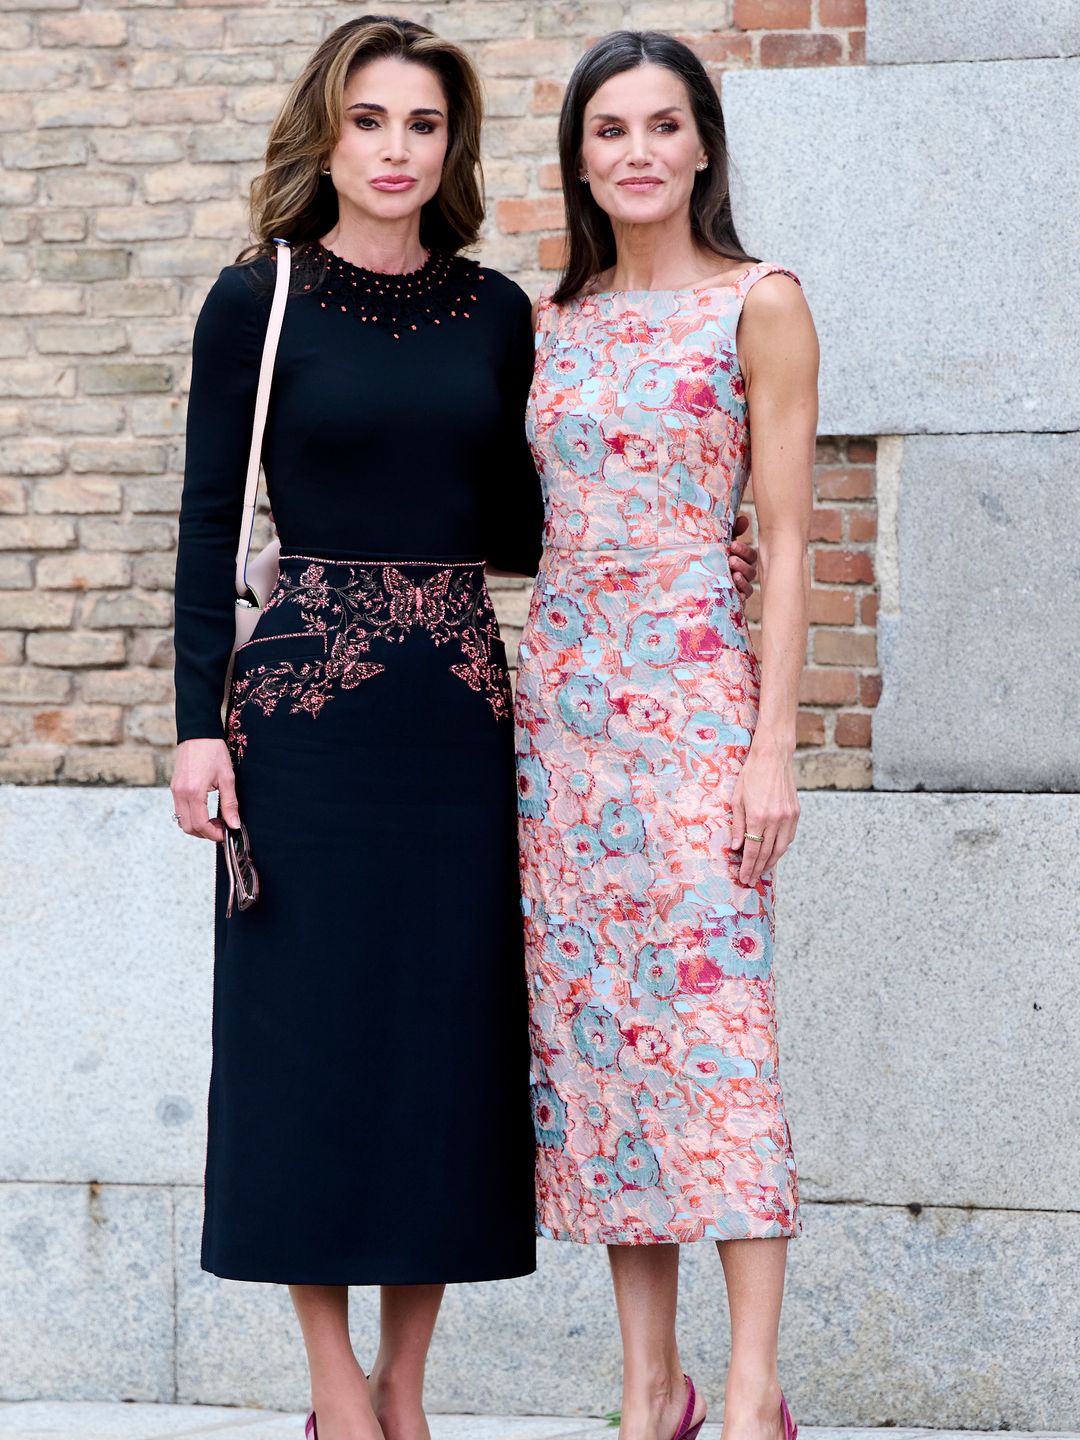 Queen Rania poses in black dress with a hint of pink, complementing Queen Letizia's pink dress